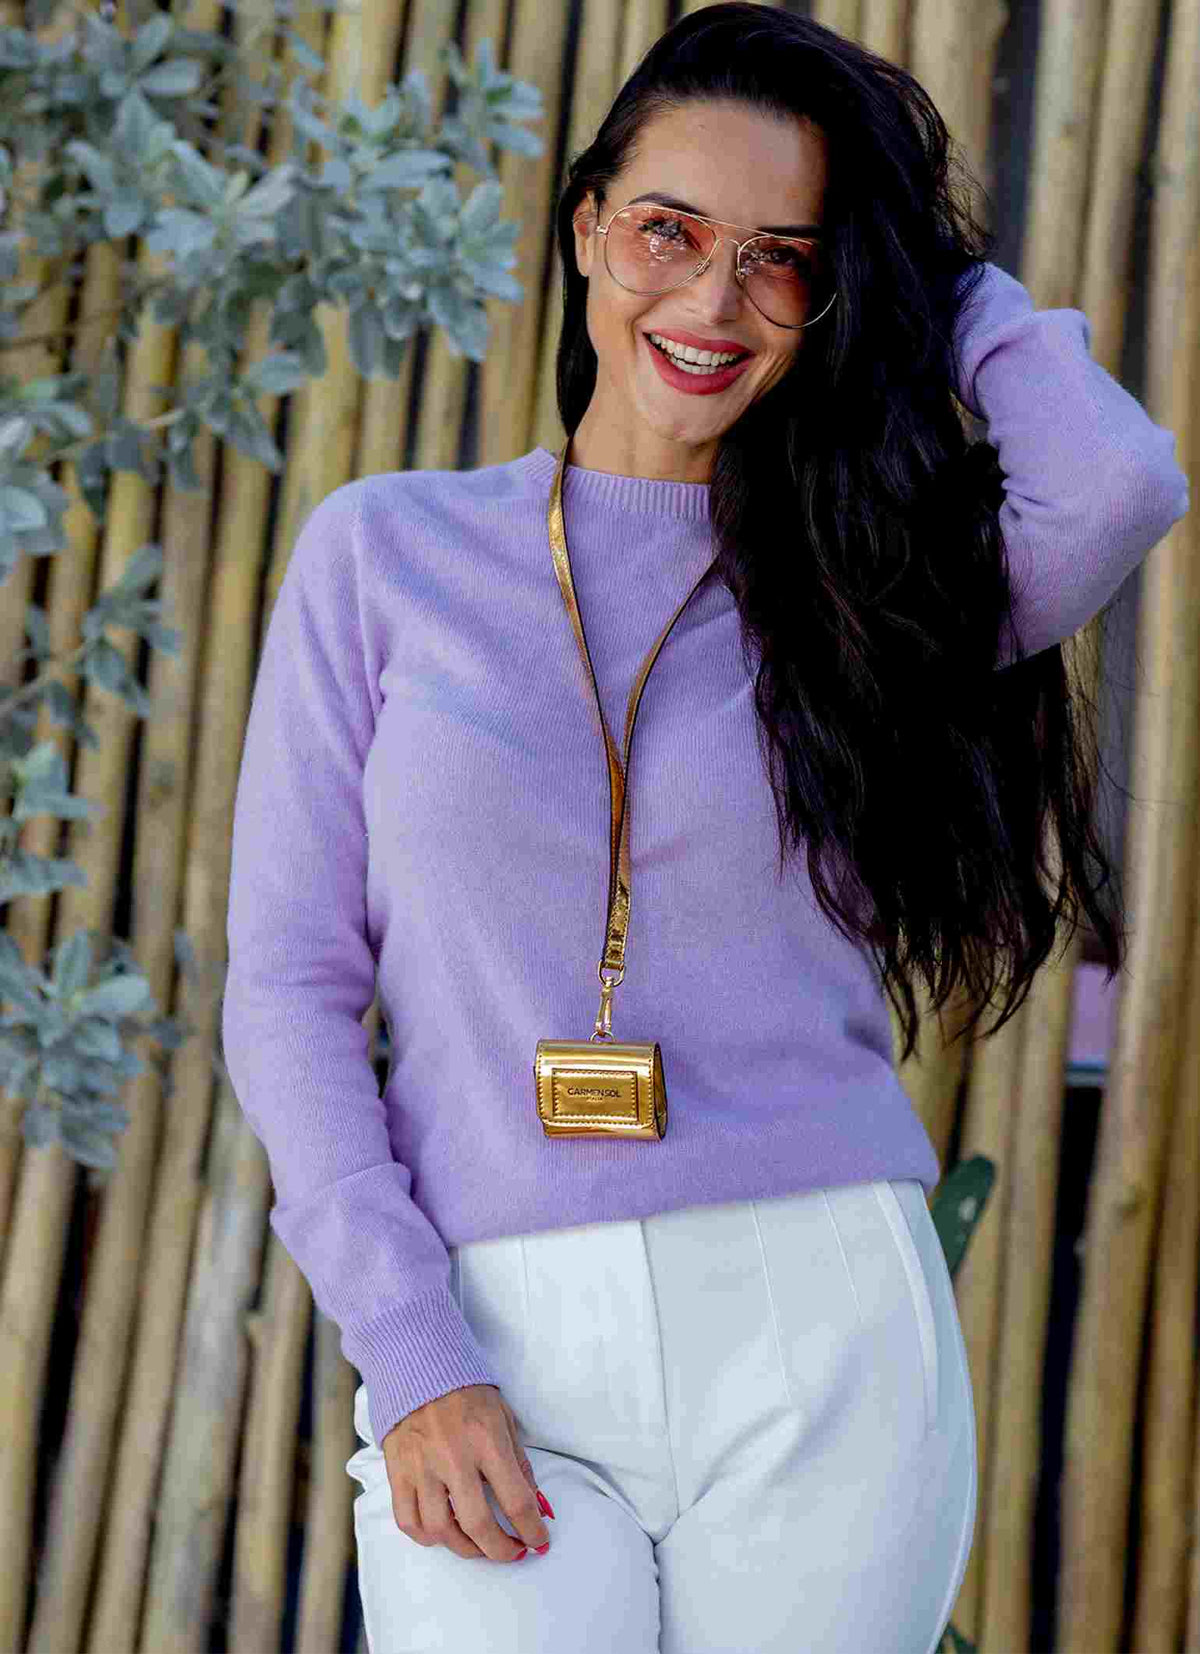 Women wearing handsfree airpod case in color gold along with Carmen Sol cashmere and sunglasses